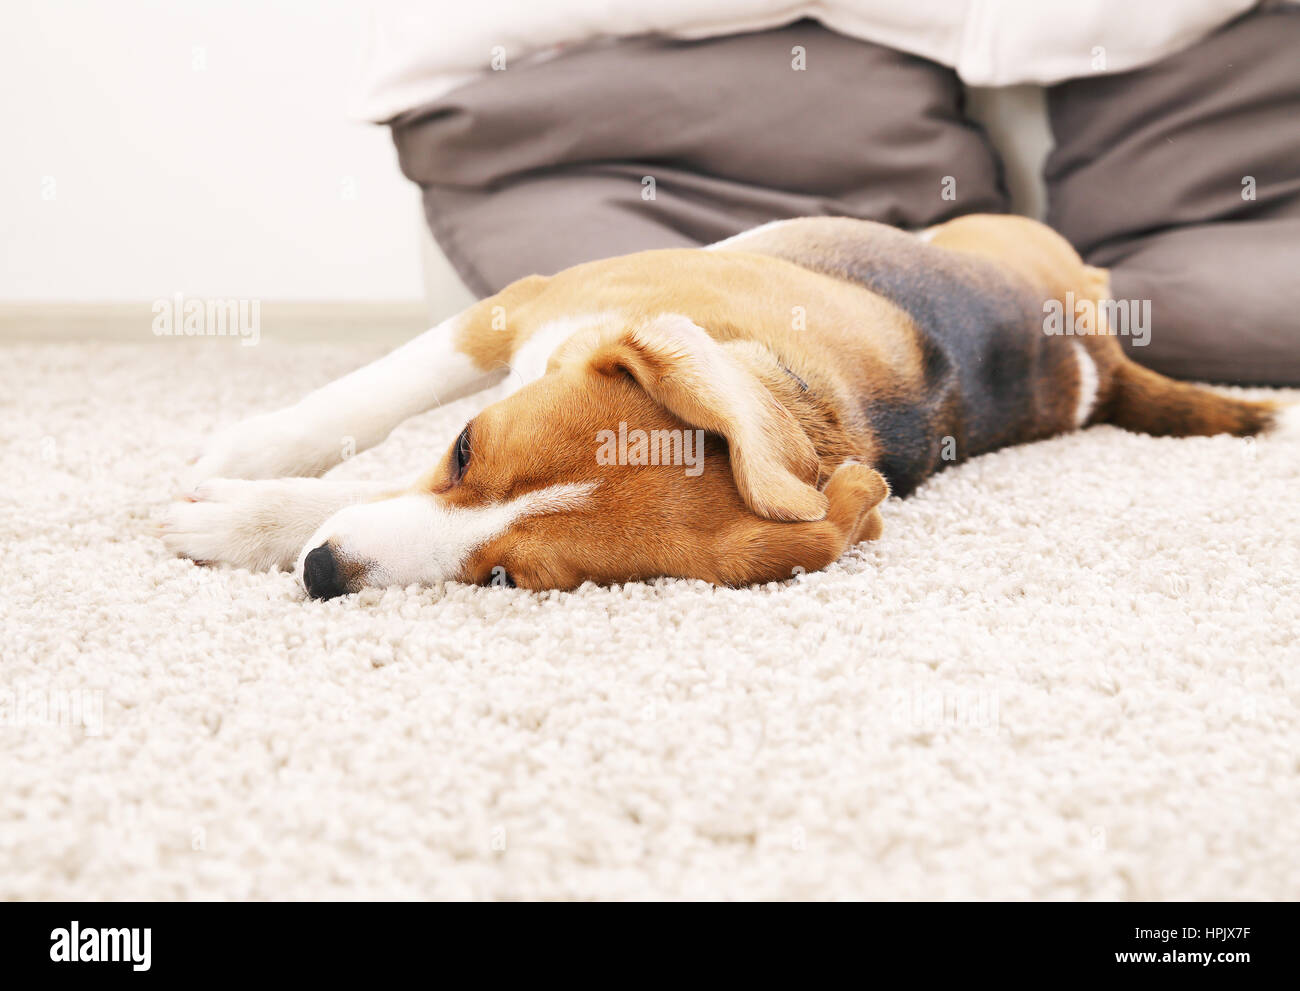 Dog lie on soft carpet. Beagle relax at home. Tree color beagle. Cute animal backgound. Stock Photo